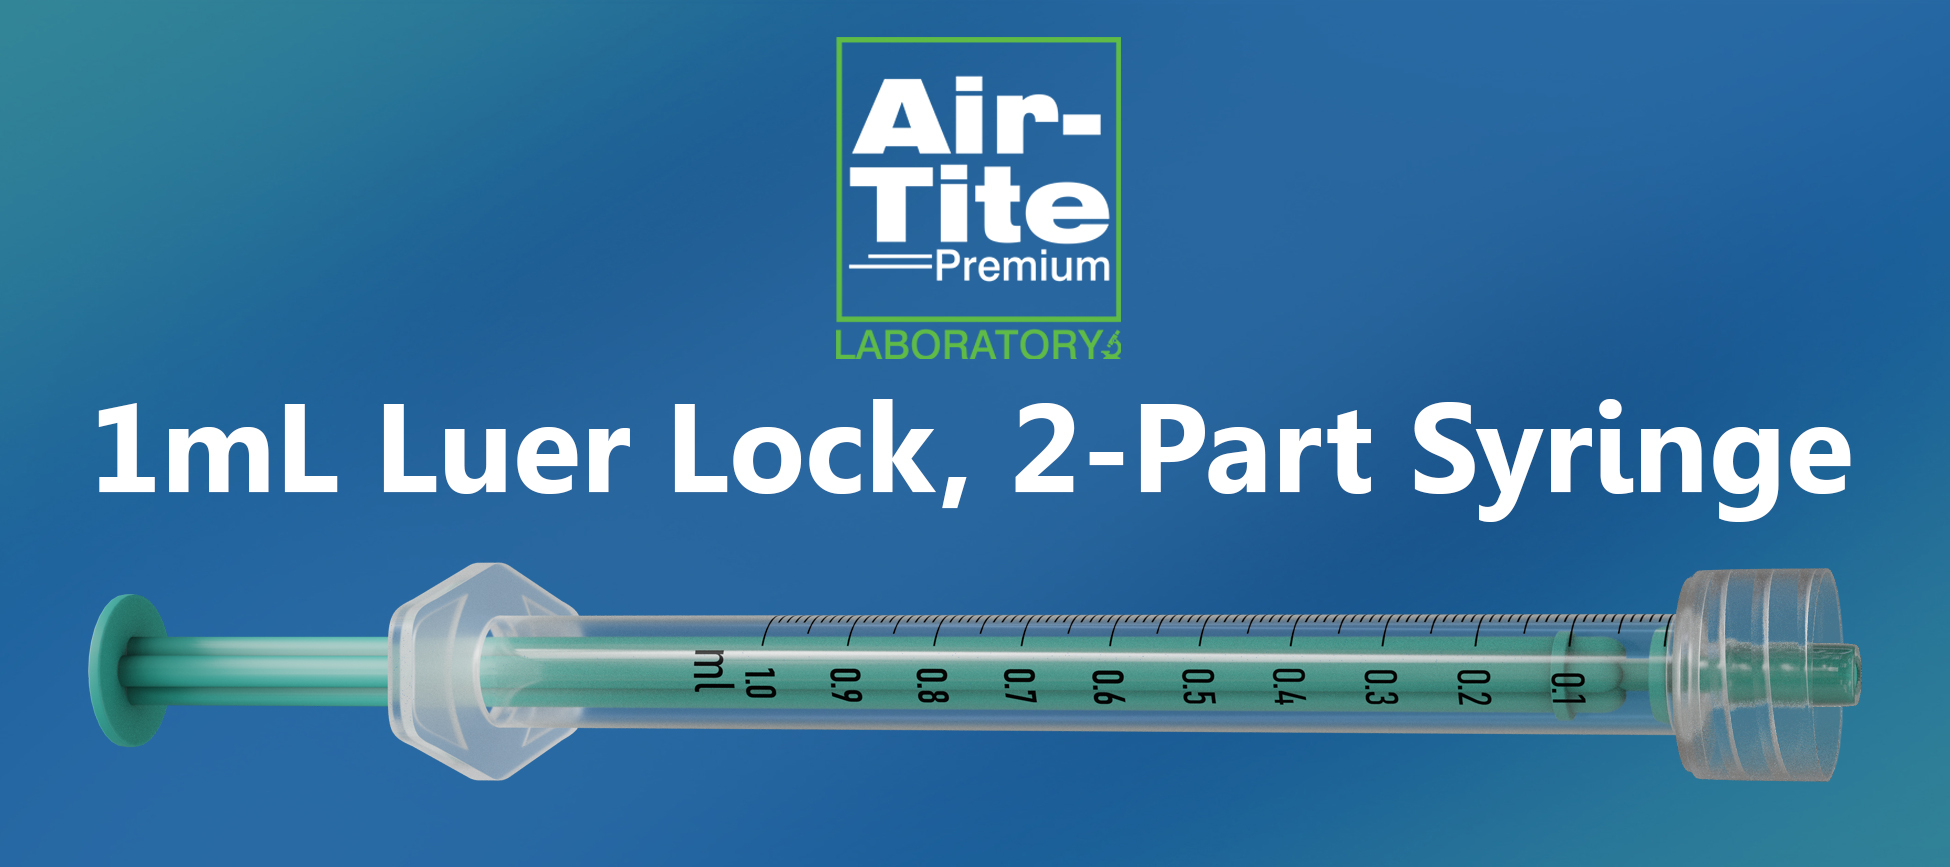 Air-Tite Premium Hypodermic Needles for Lab/Vet Use:First Aid and  Medical:Patient